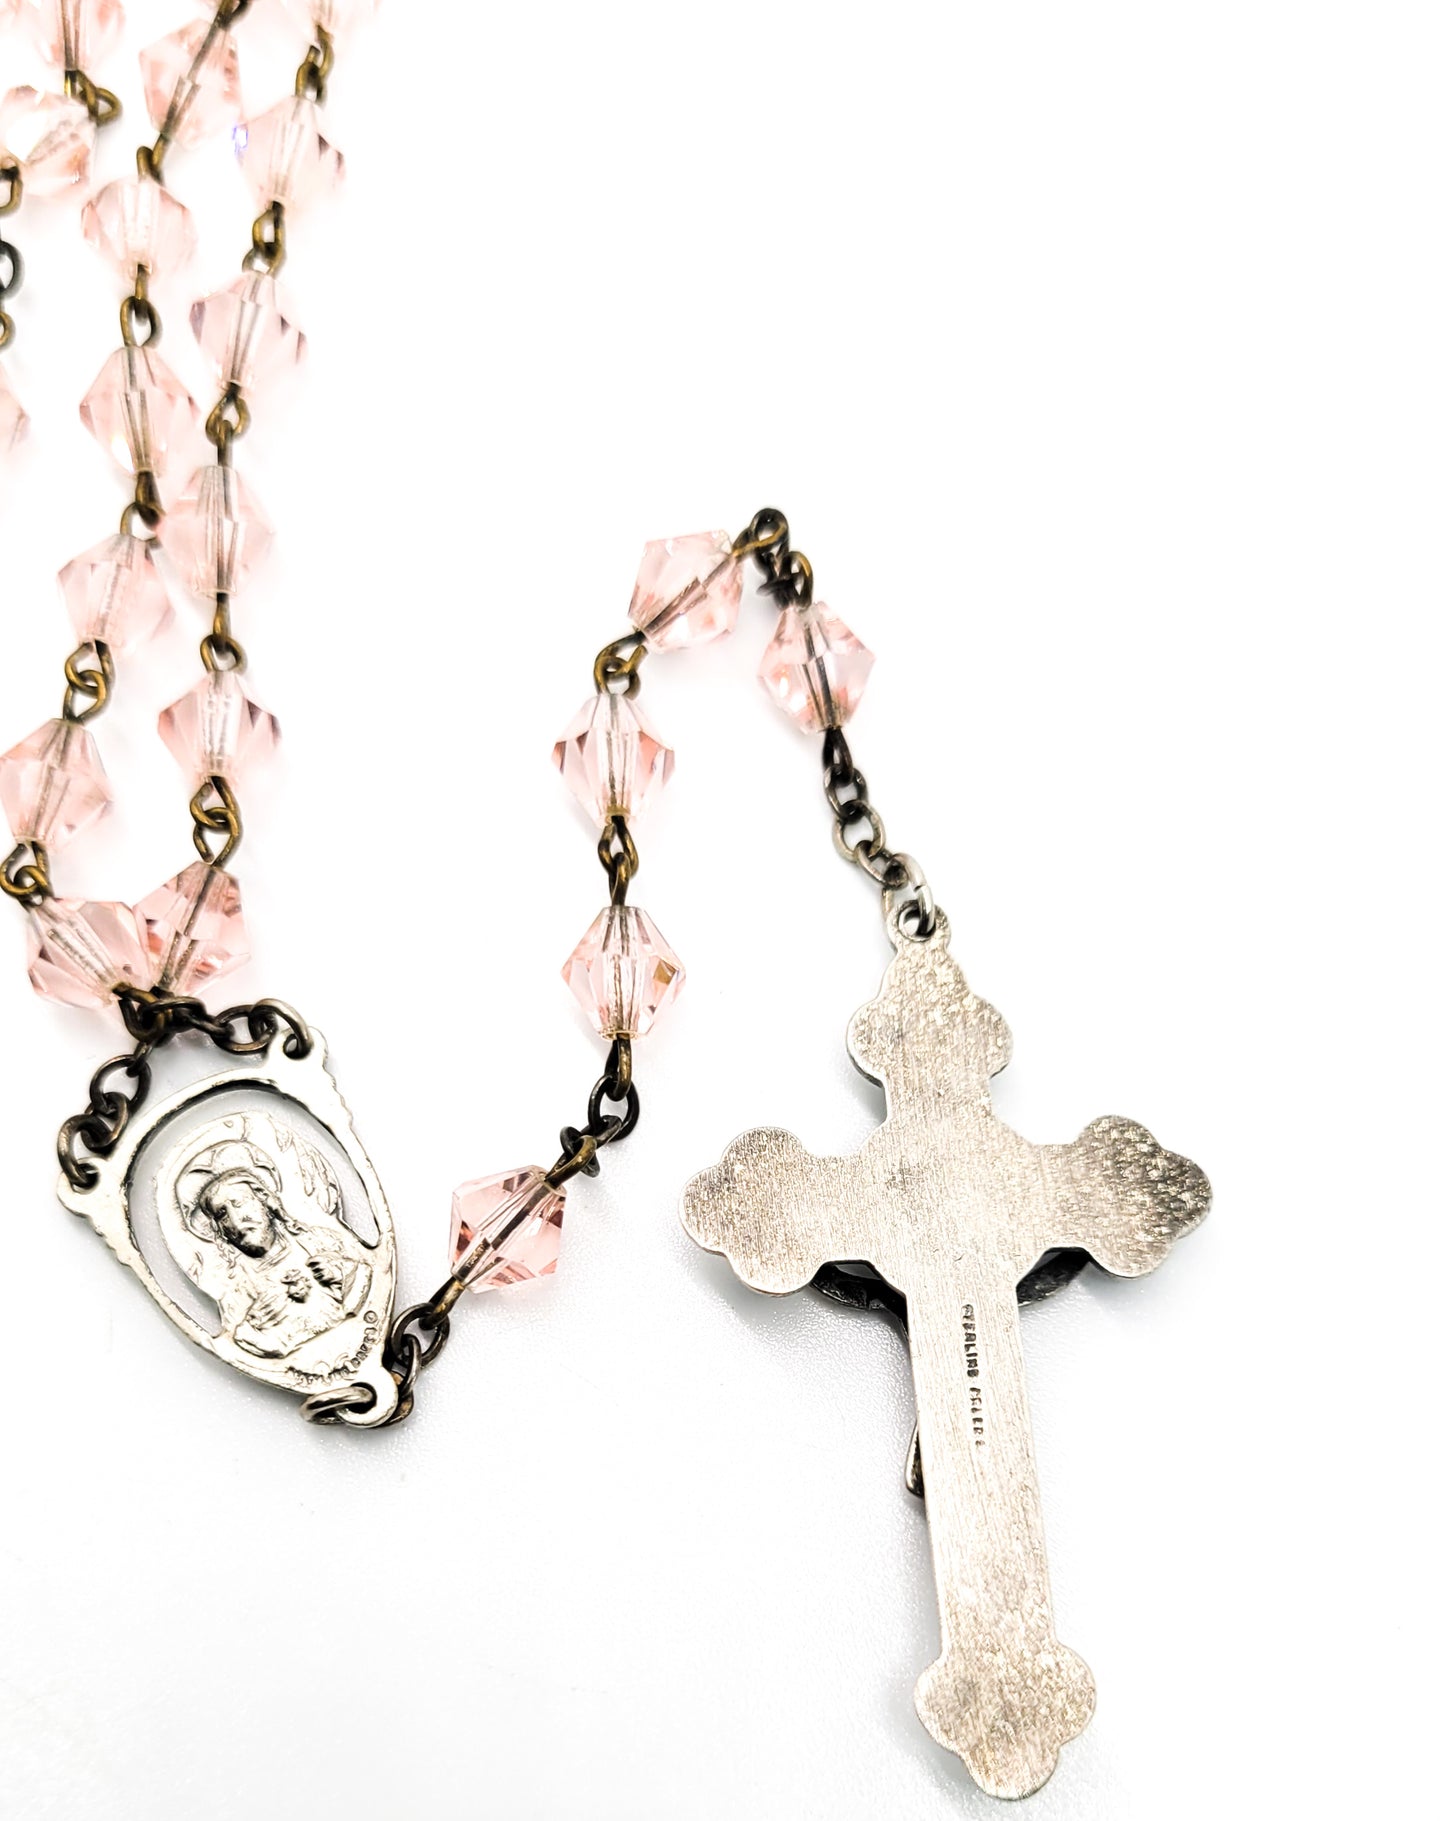 Creed vintage sterling silver detailed crucifix Rosary pink Austrian crystal beads